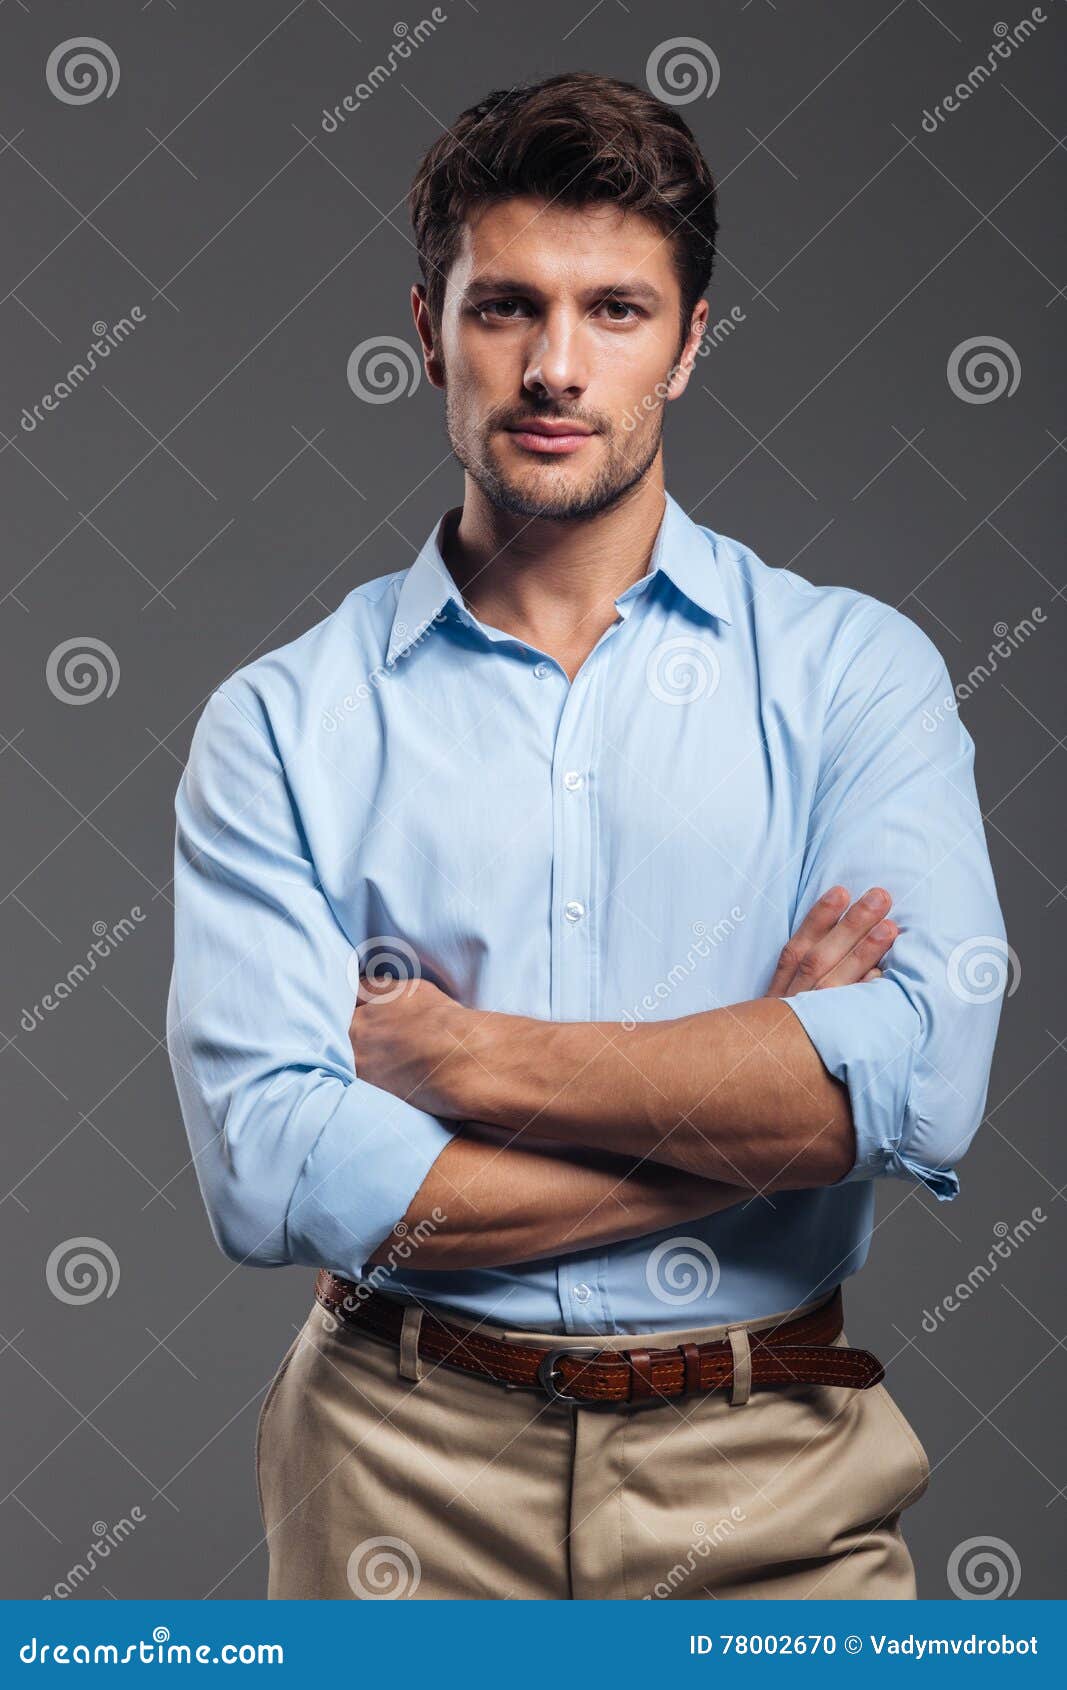 Serious Handsome Man with Arms Folded Standing Stock Photo - Image of ...